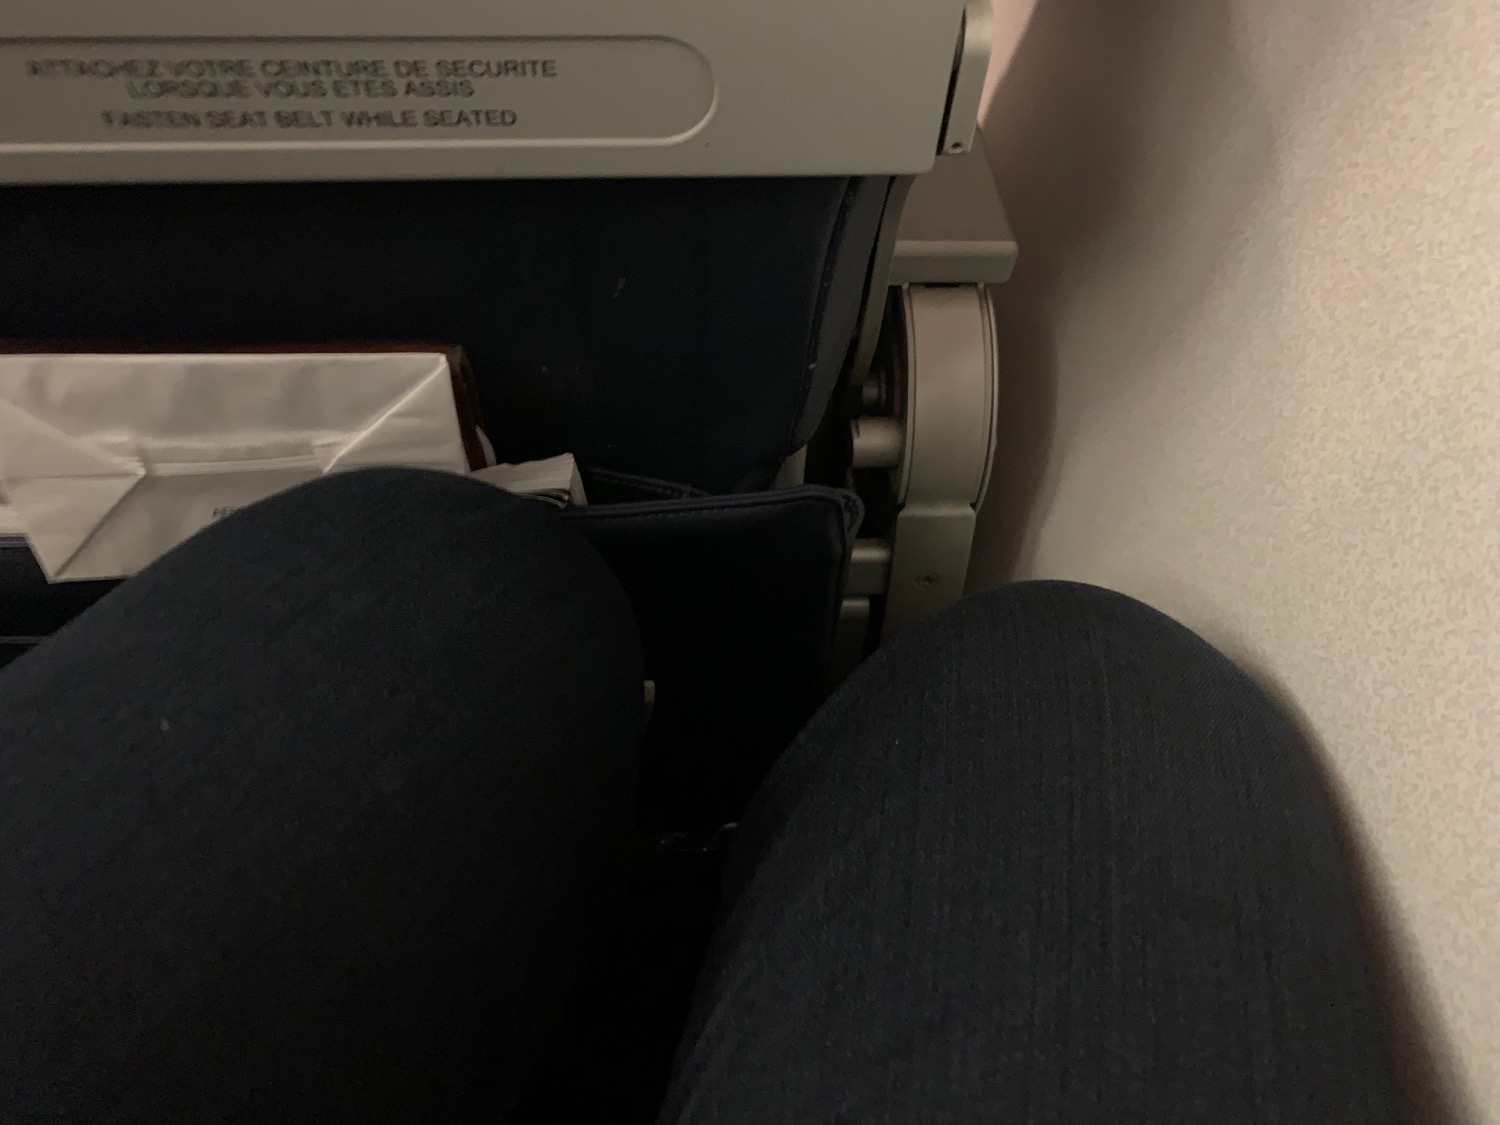 a person's legs and a seat